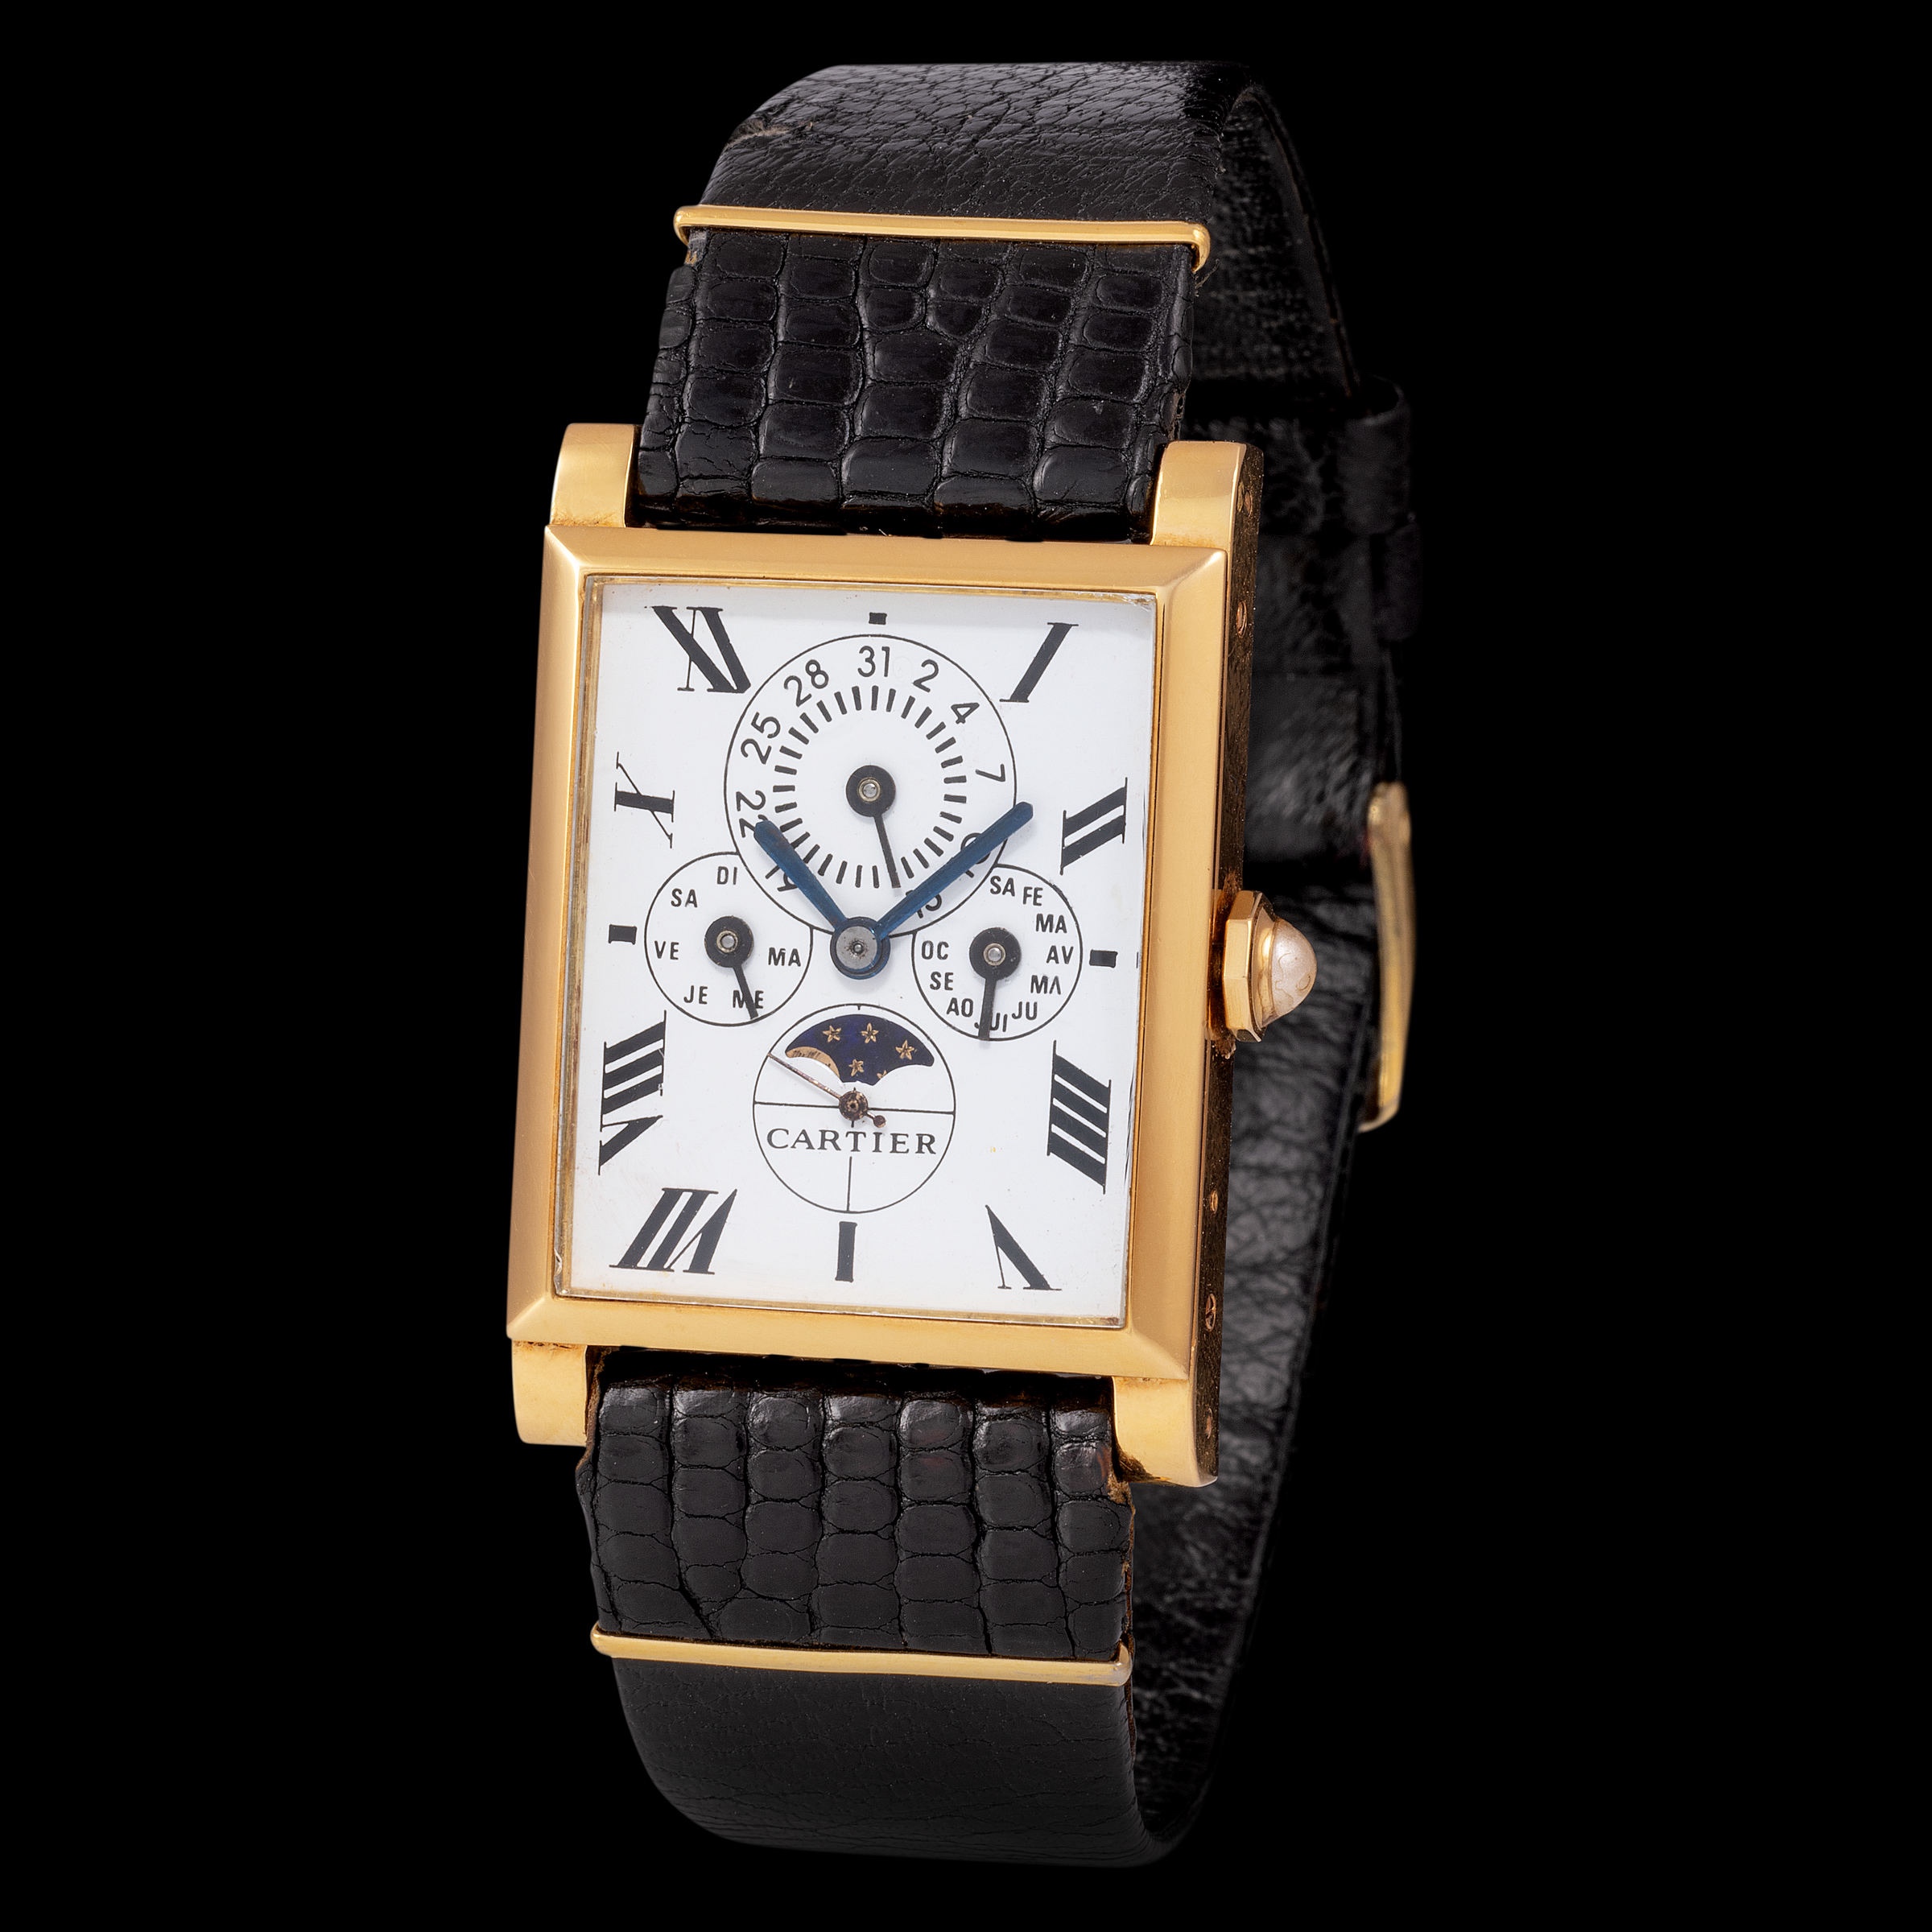 Cartier, Fresh to the Market, 35… | Lot 96, Exclusive Timepieces 